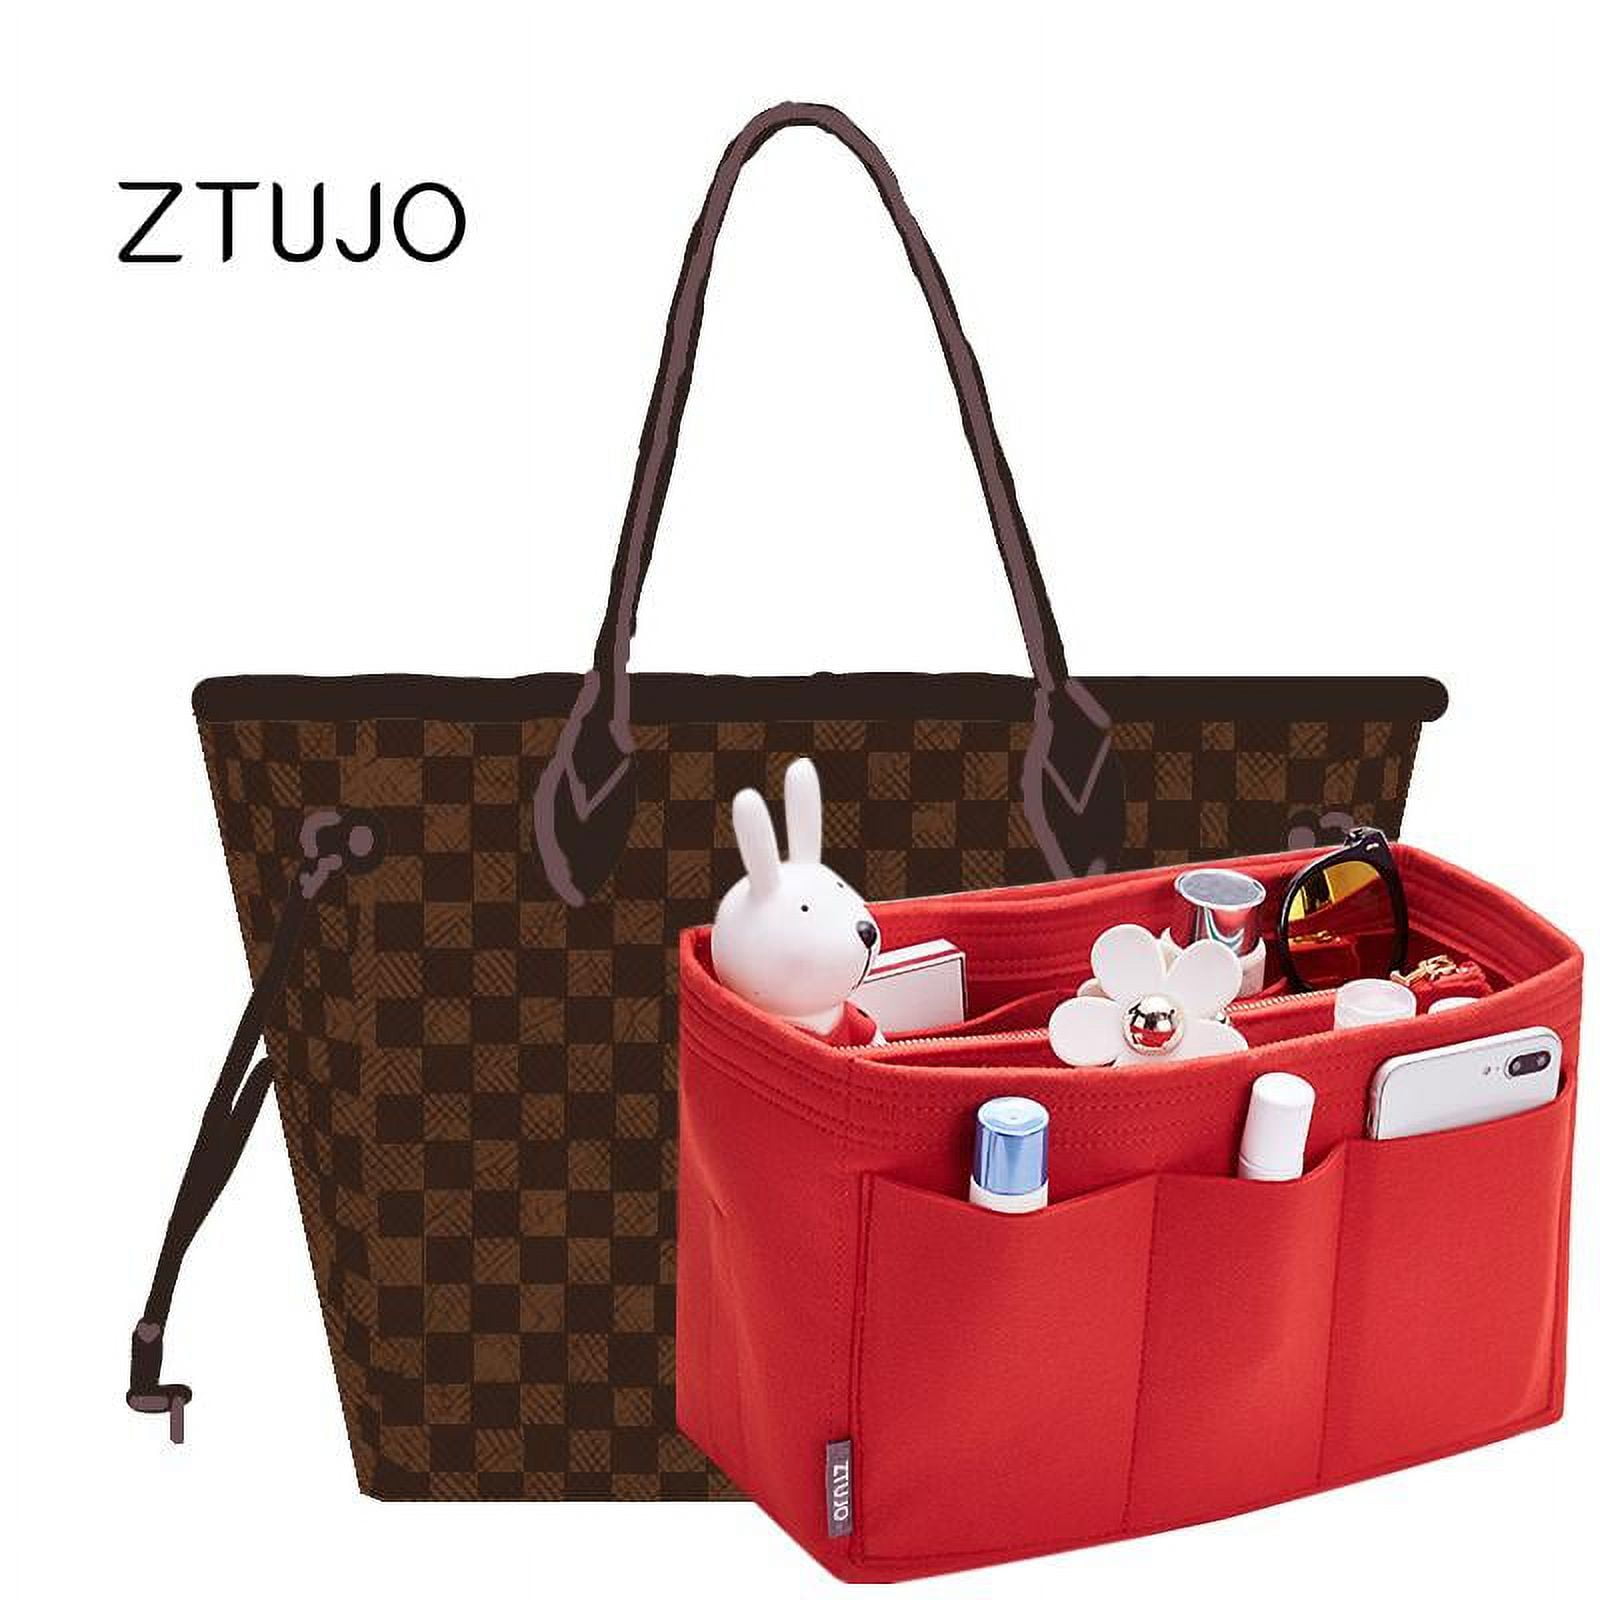 Premium High end version of Purse Organizer specially for LV